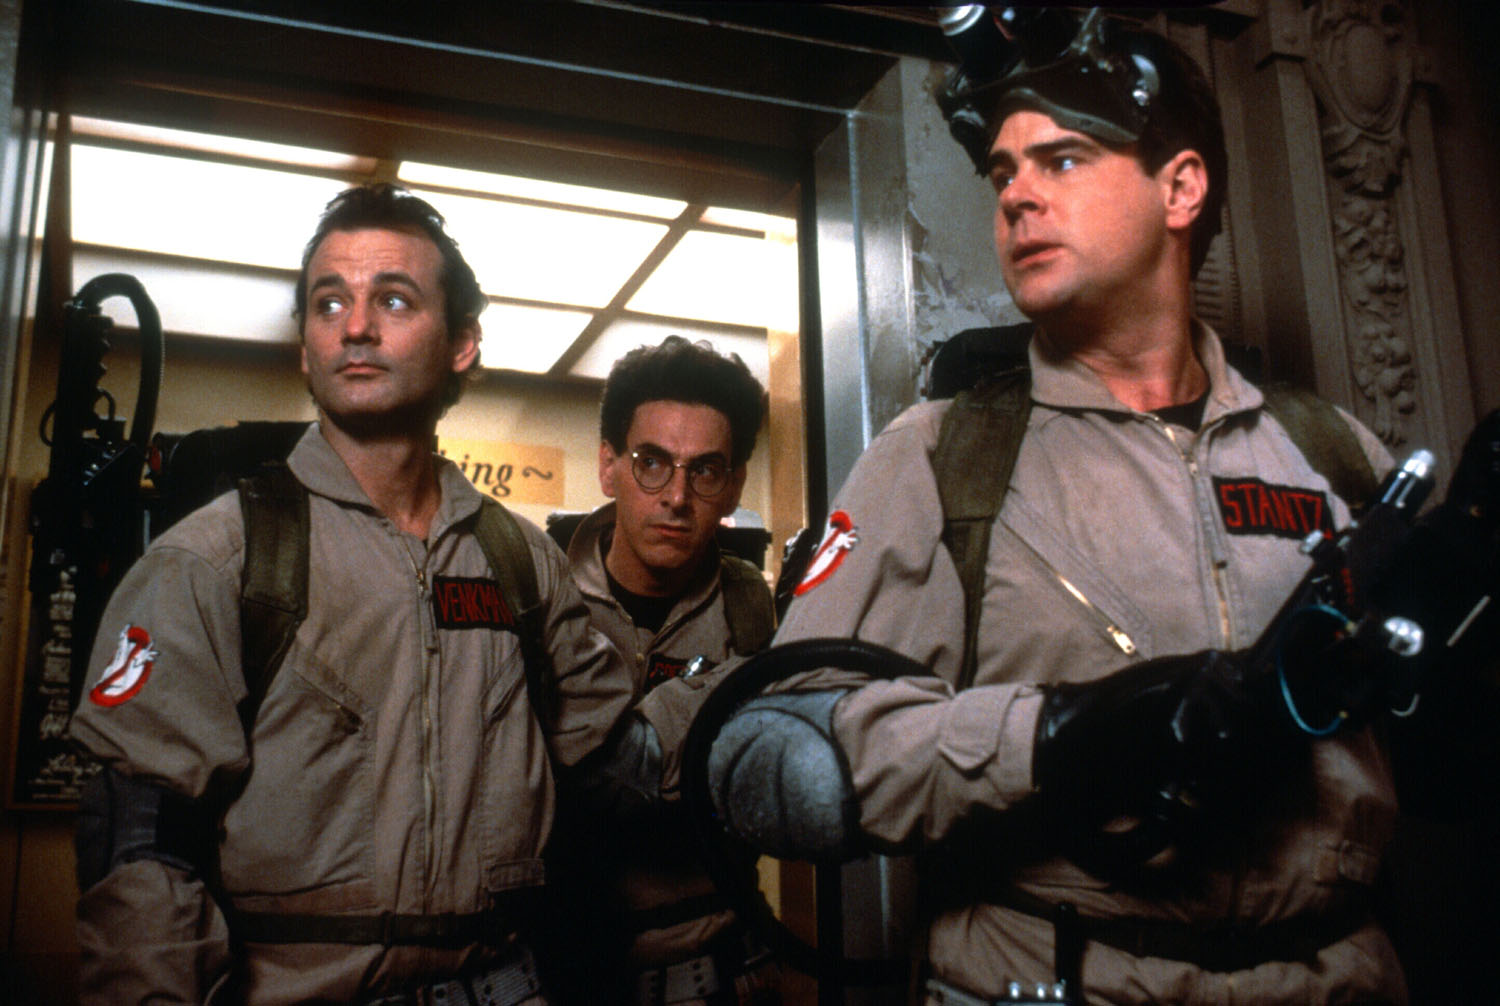 video review : Ghostbusters